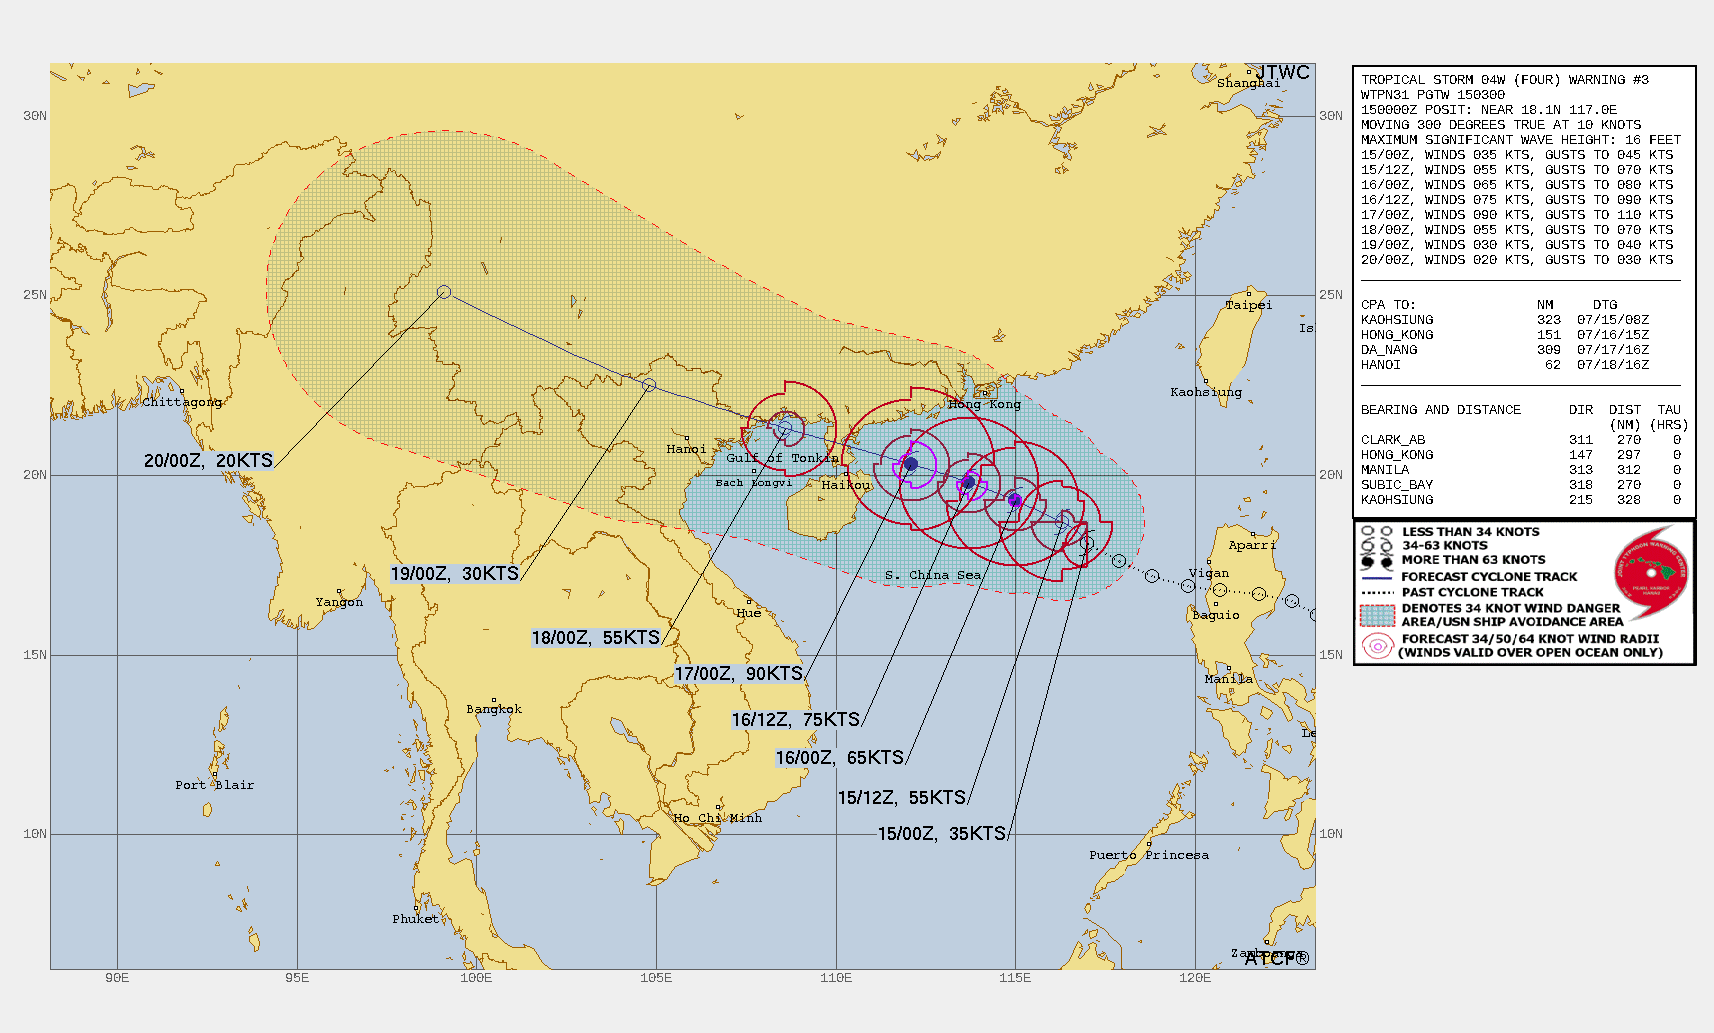 FORECAST REASONING.  SIGNIFICANT FORECAST CHANGES: THERE ARE NO SIGNIFICANT CHANGES TO THE FORECAST FROM THE PREVIOUS WARNING.  FORECAST DISCUSSION: TD 04W WILL CONTINUE TO TRACK GENERALLY WEST-NORTHWESTWARD UNDER THE STEERING INFLUENCE OF THE STR, OVER THE  WARM SCS, MAKE LANDFALL ON THE LEIZHOU PENINSULA NEAR ZHANJIANG  BEFORE TAU 60, AND CROSS THE GULF OF TONKIN BEFORE MAKING A FINAL  LANDFALL ALONG THE VIETNAM-CHINA BORDER AFTER TAU 72. THE FAVORABLE  ENVIRONMENT WILL FUEL SIGNIFICANT INTENSIFICATION TO A PEAK OF 90KTS  AT TAU 48. LAND INTERACTION WITH RUGGED TERRAIN WILL MOSTLY BE  RESPONSIBLE FOR THE GRADUAL THEN RAPID EROSION AFTER TAU 48, LEADING  TO DISSIPATION BY TAU 120 AS IT TRACKS DEEP INTO THE CHINESE  INTERIOR.